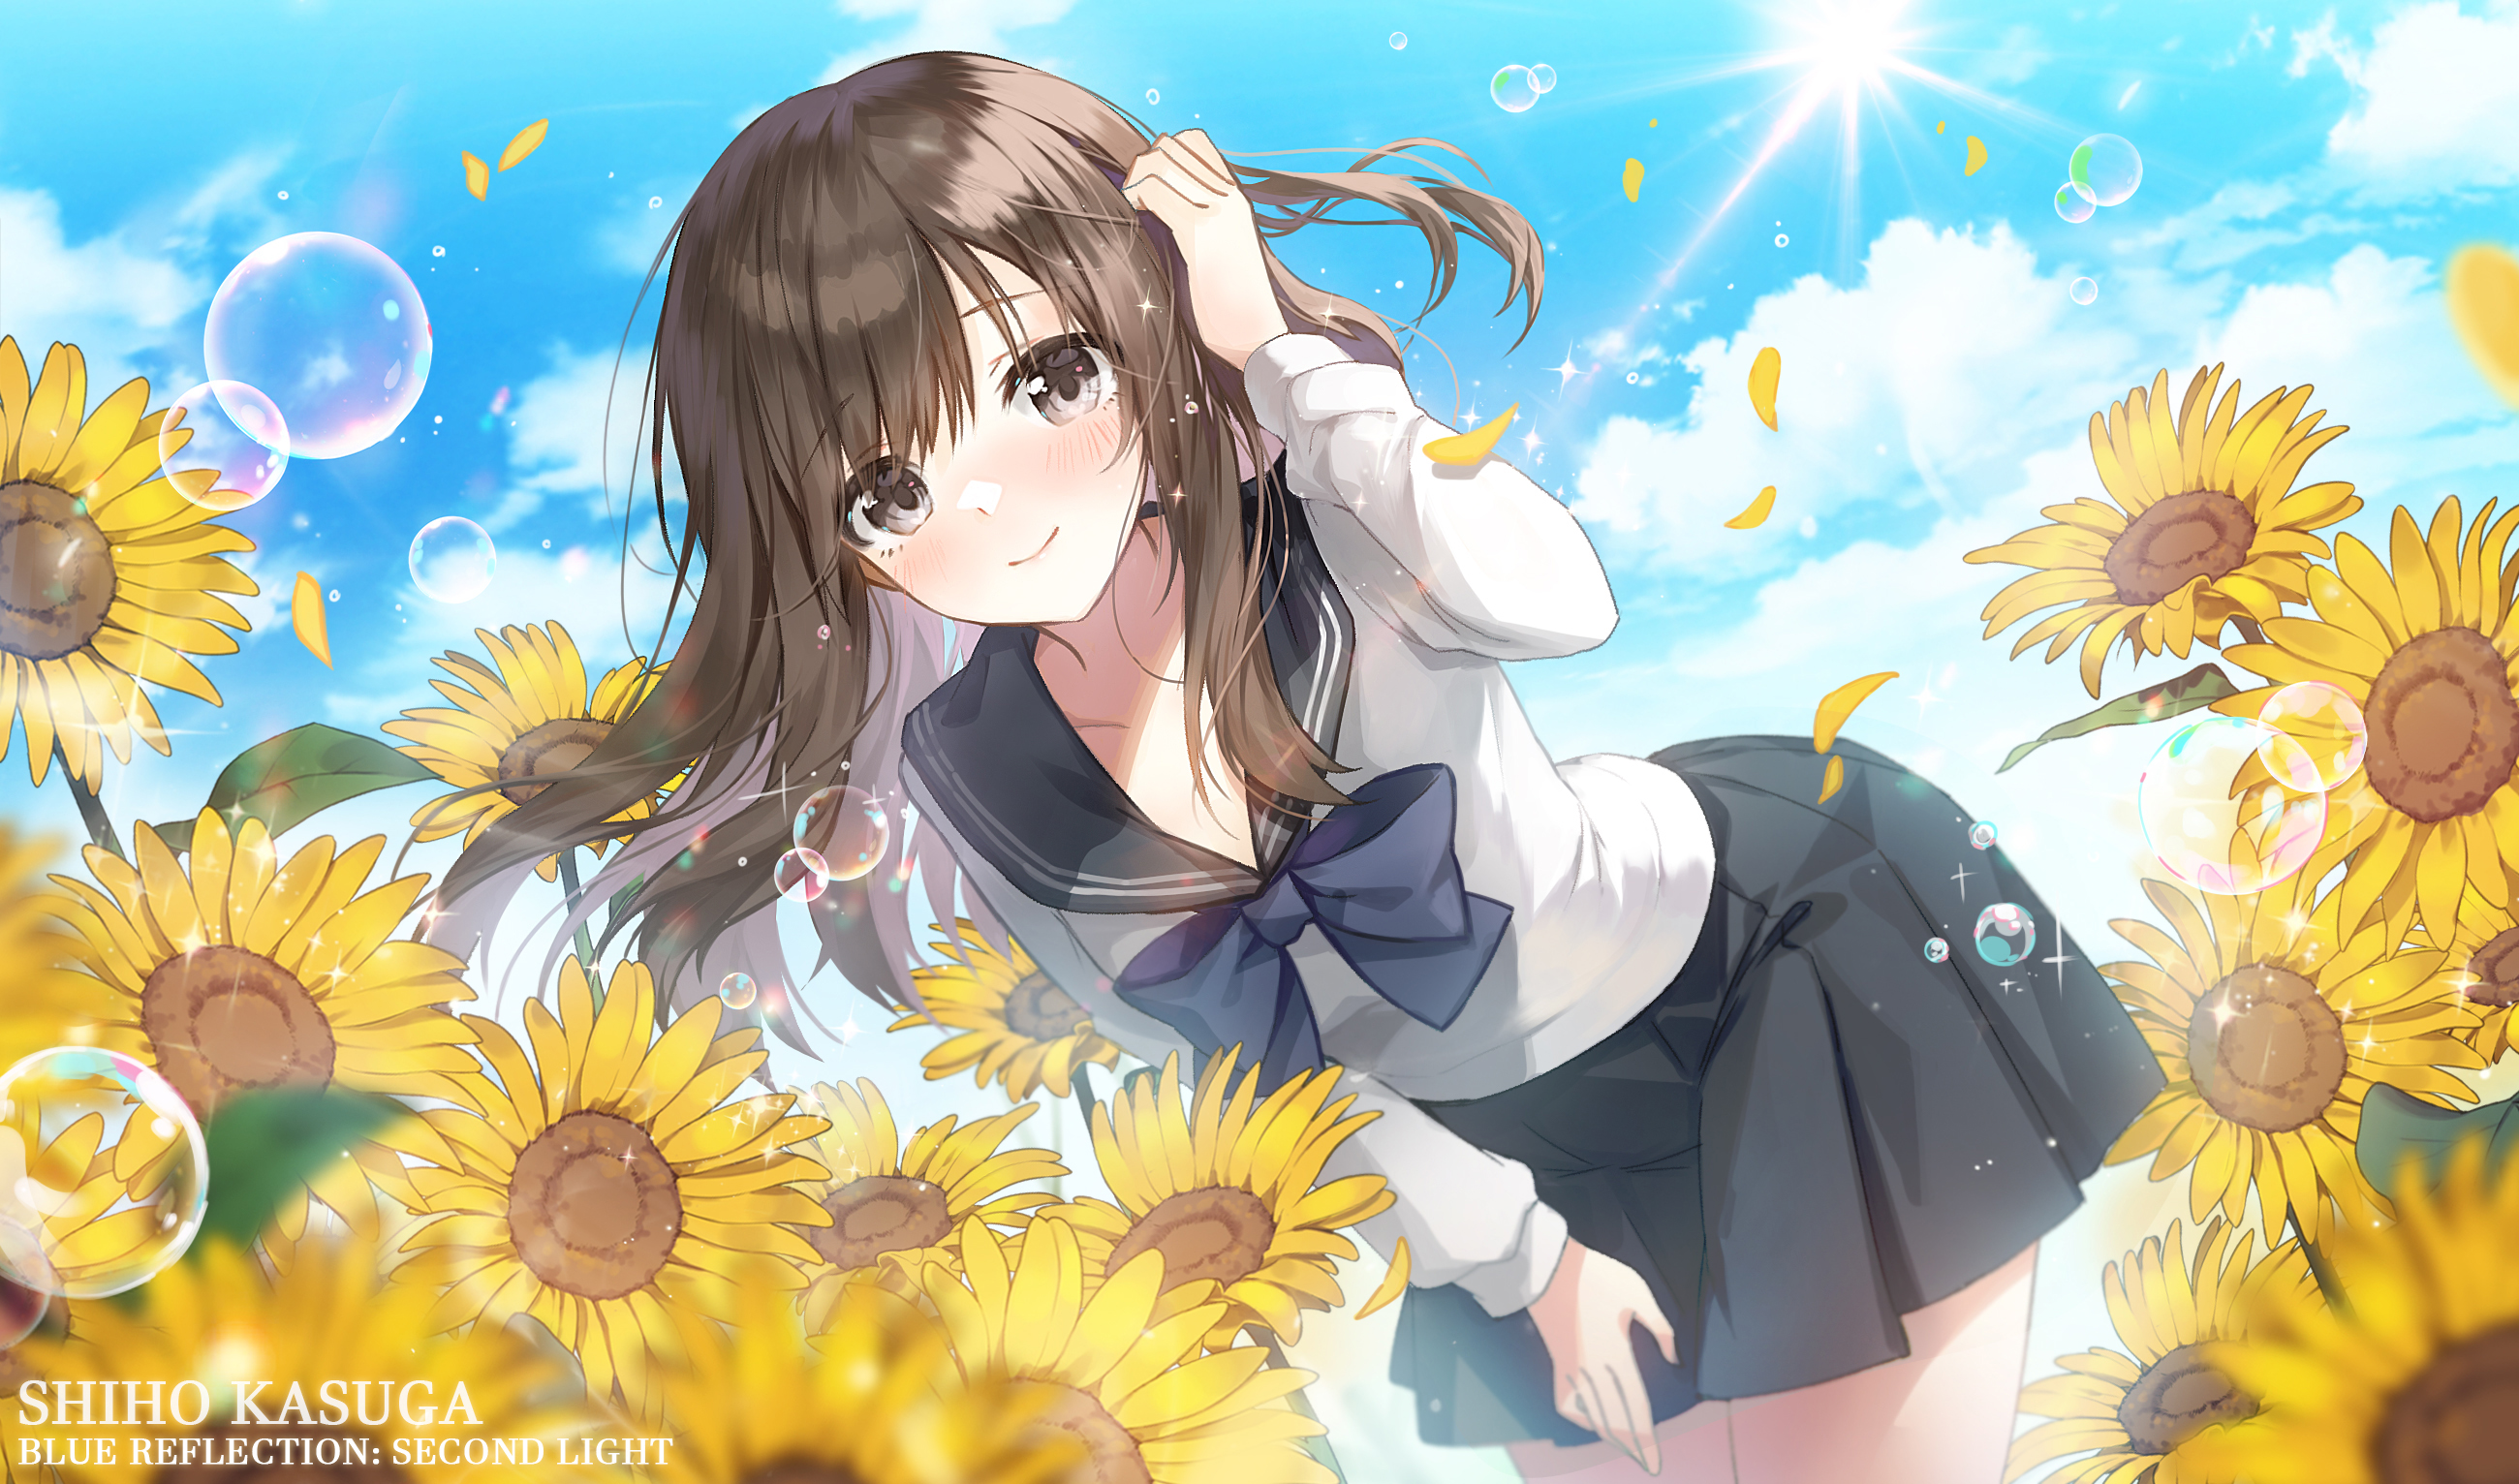 Anime 2600x1532 anime anime girls dandelion petals water drops bubbles sky clouds Sun sunlight smiling schoolgirl school uniform looking at viewer bent over bow tie long hair hair blowing in the wind stars brunette flowers sunflowers